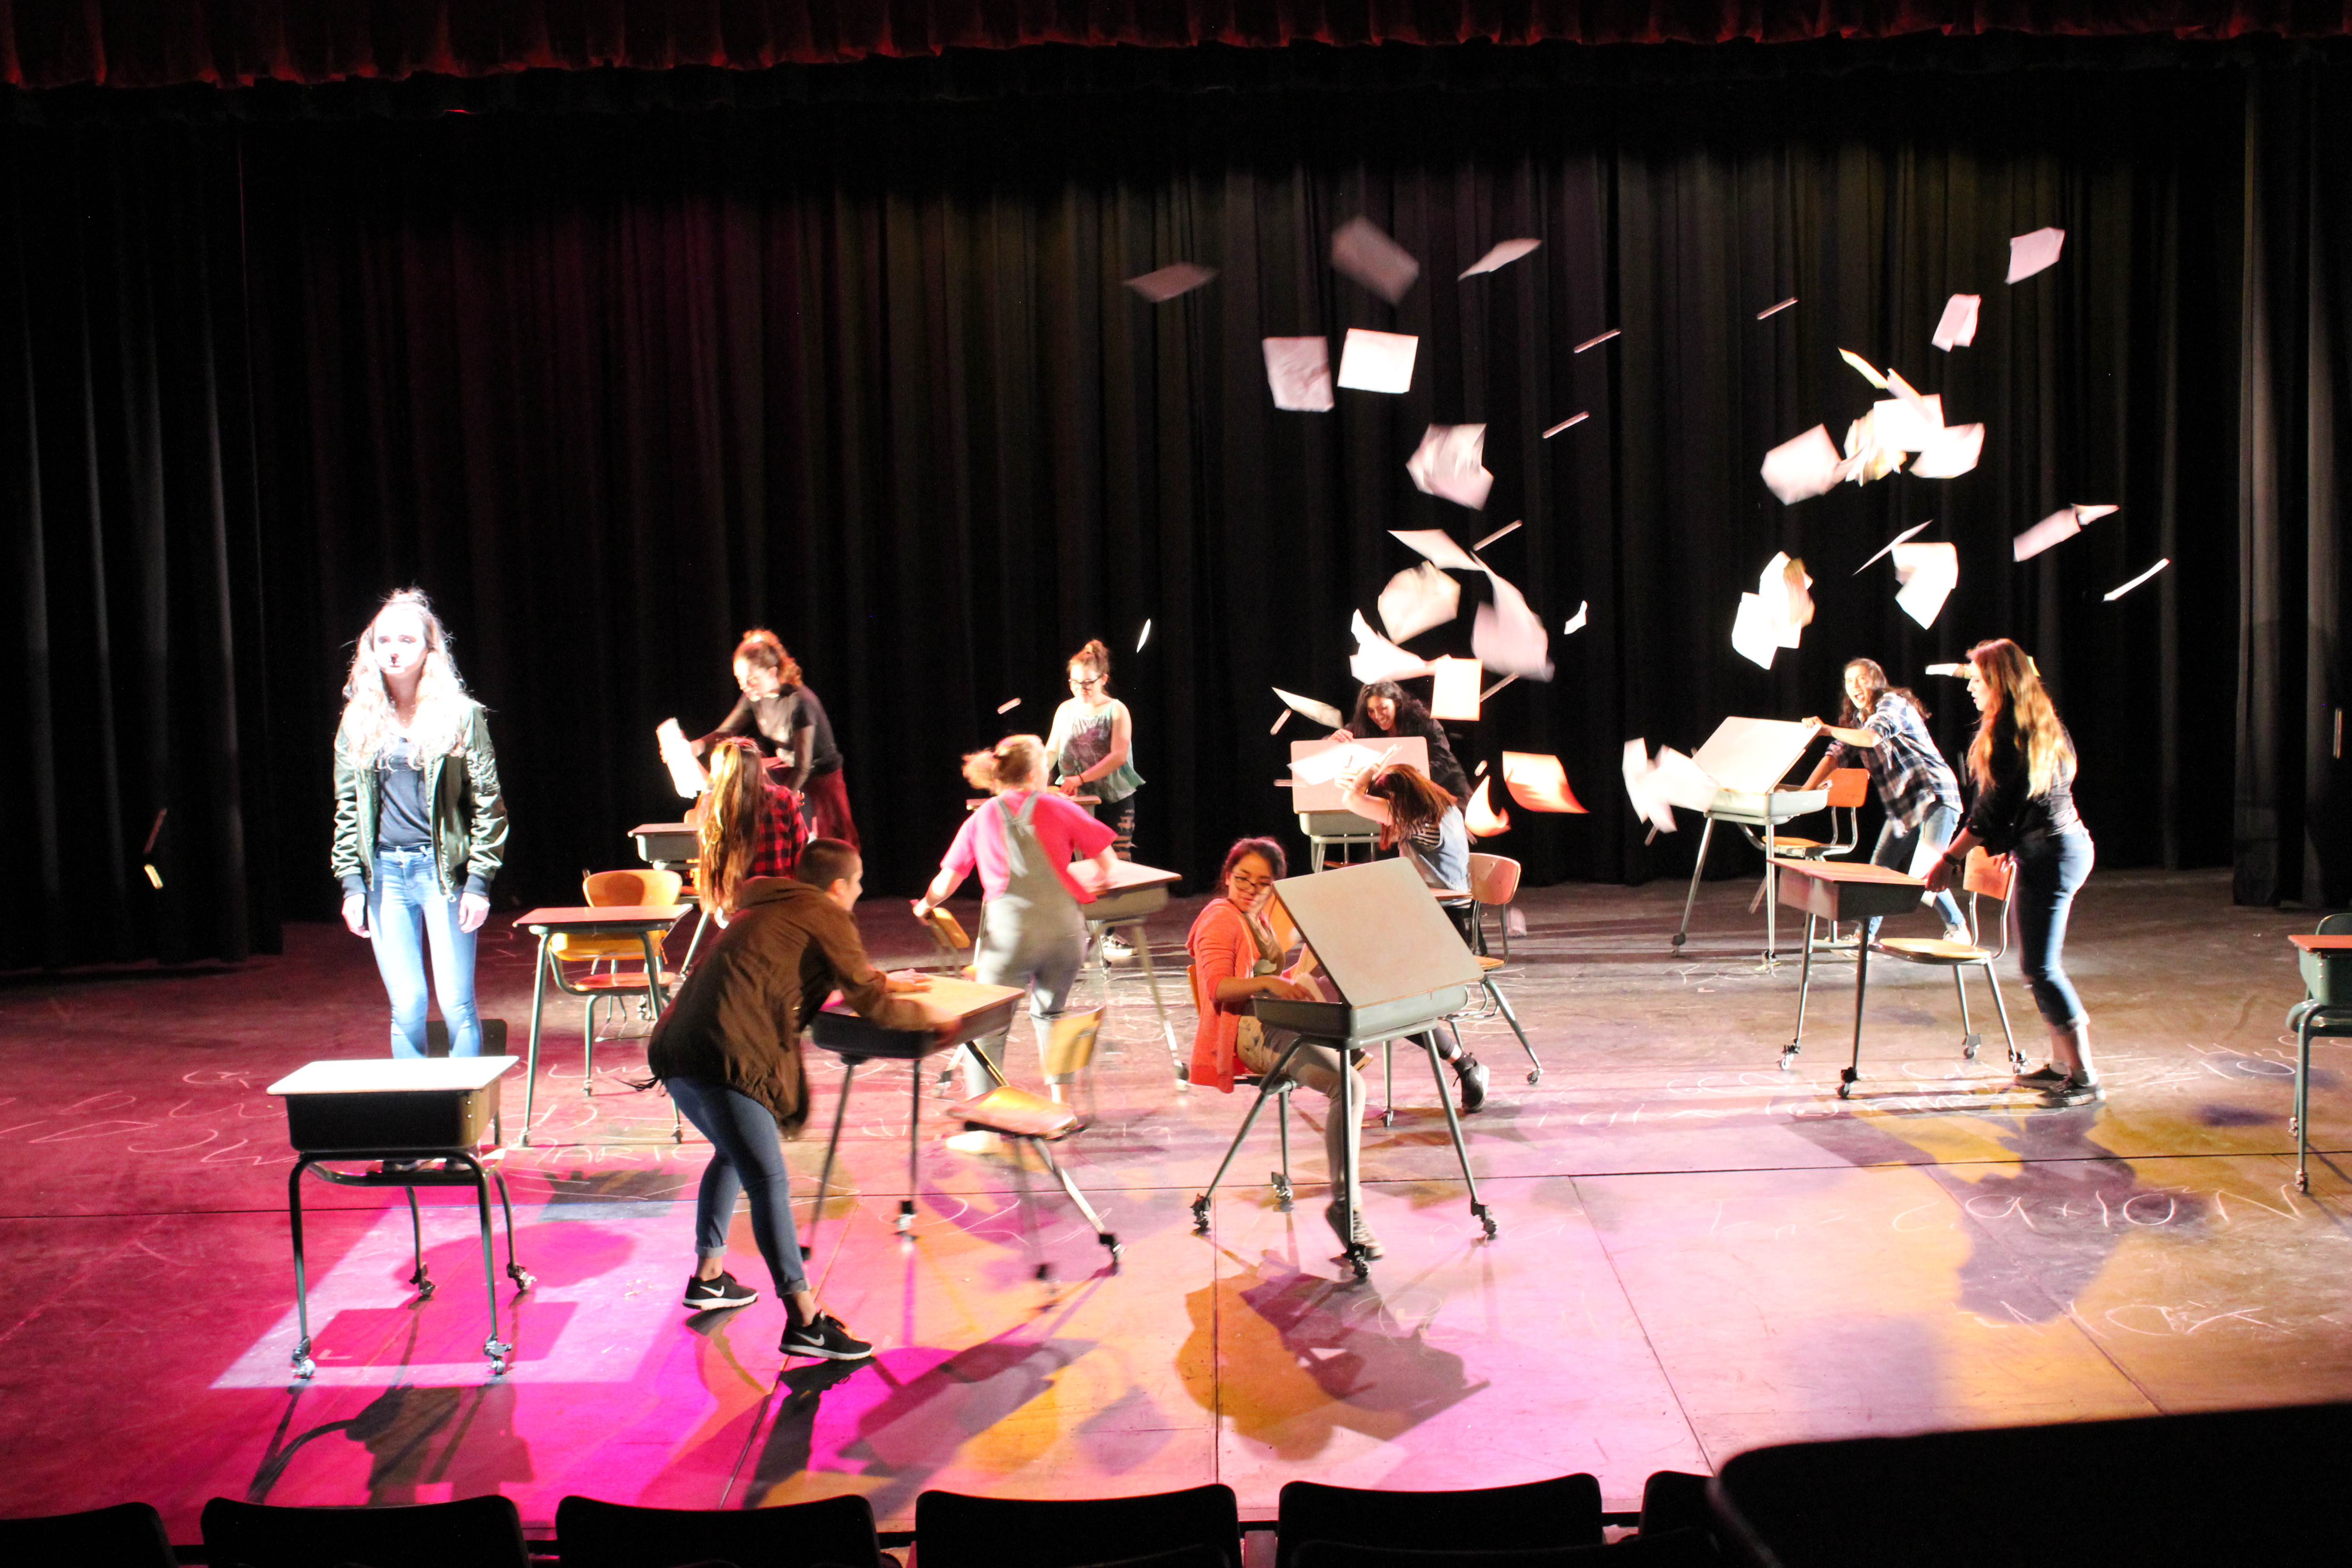 A scene from Exploder at Western Canada High School 